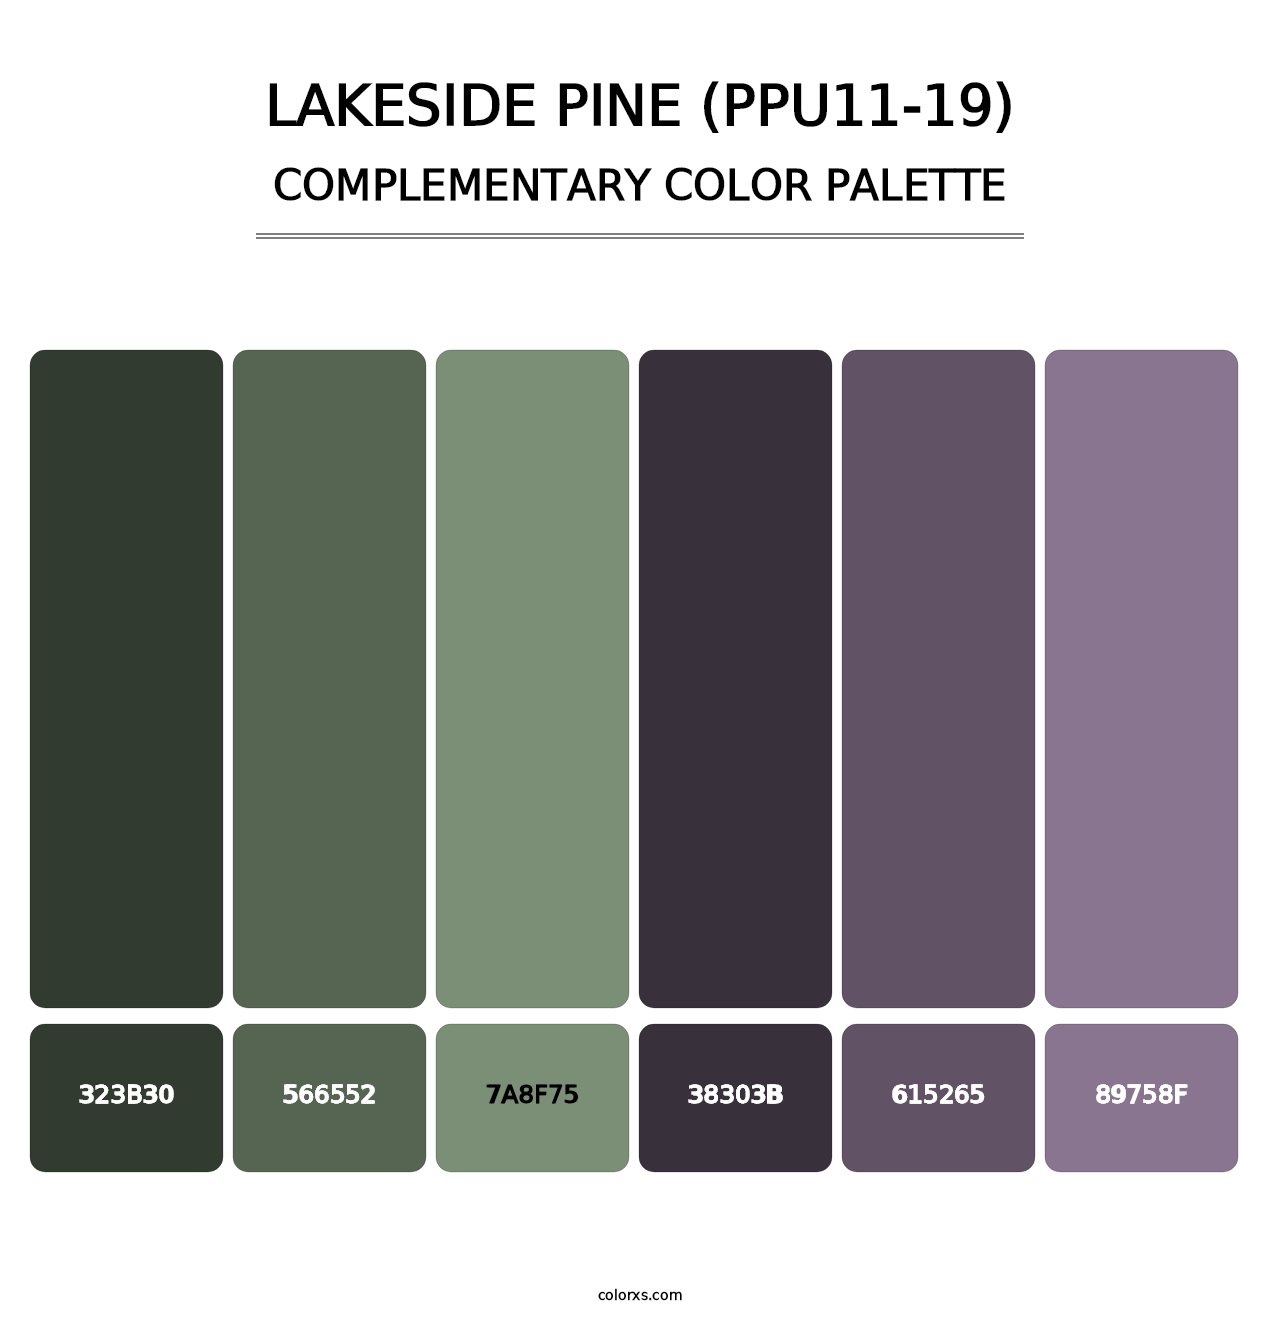 Lakeside Pine (PPU11-19) - Complementary Color Palette